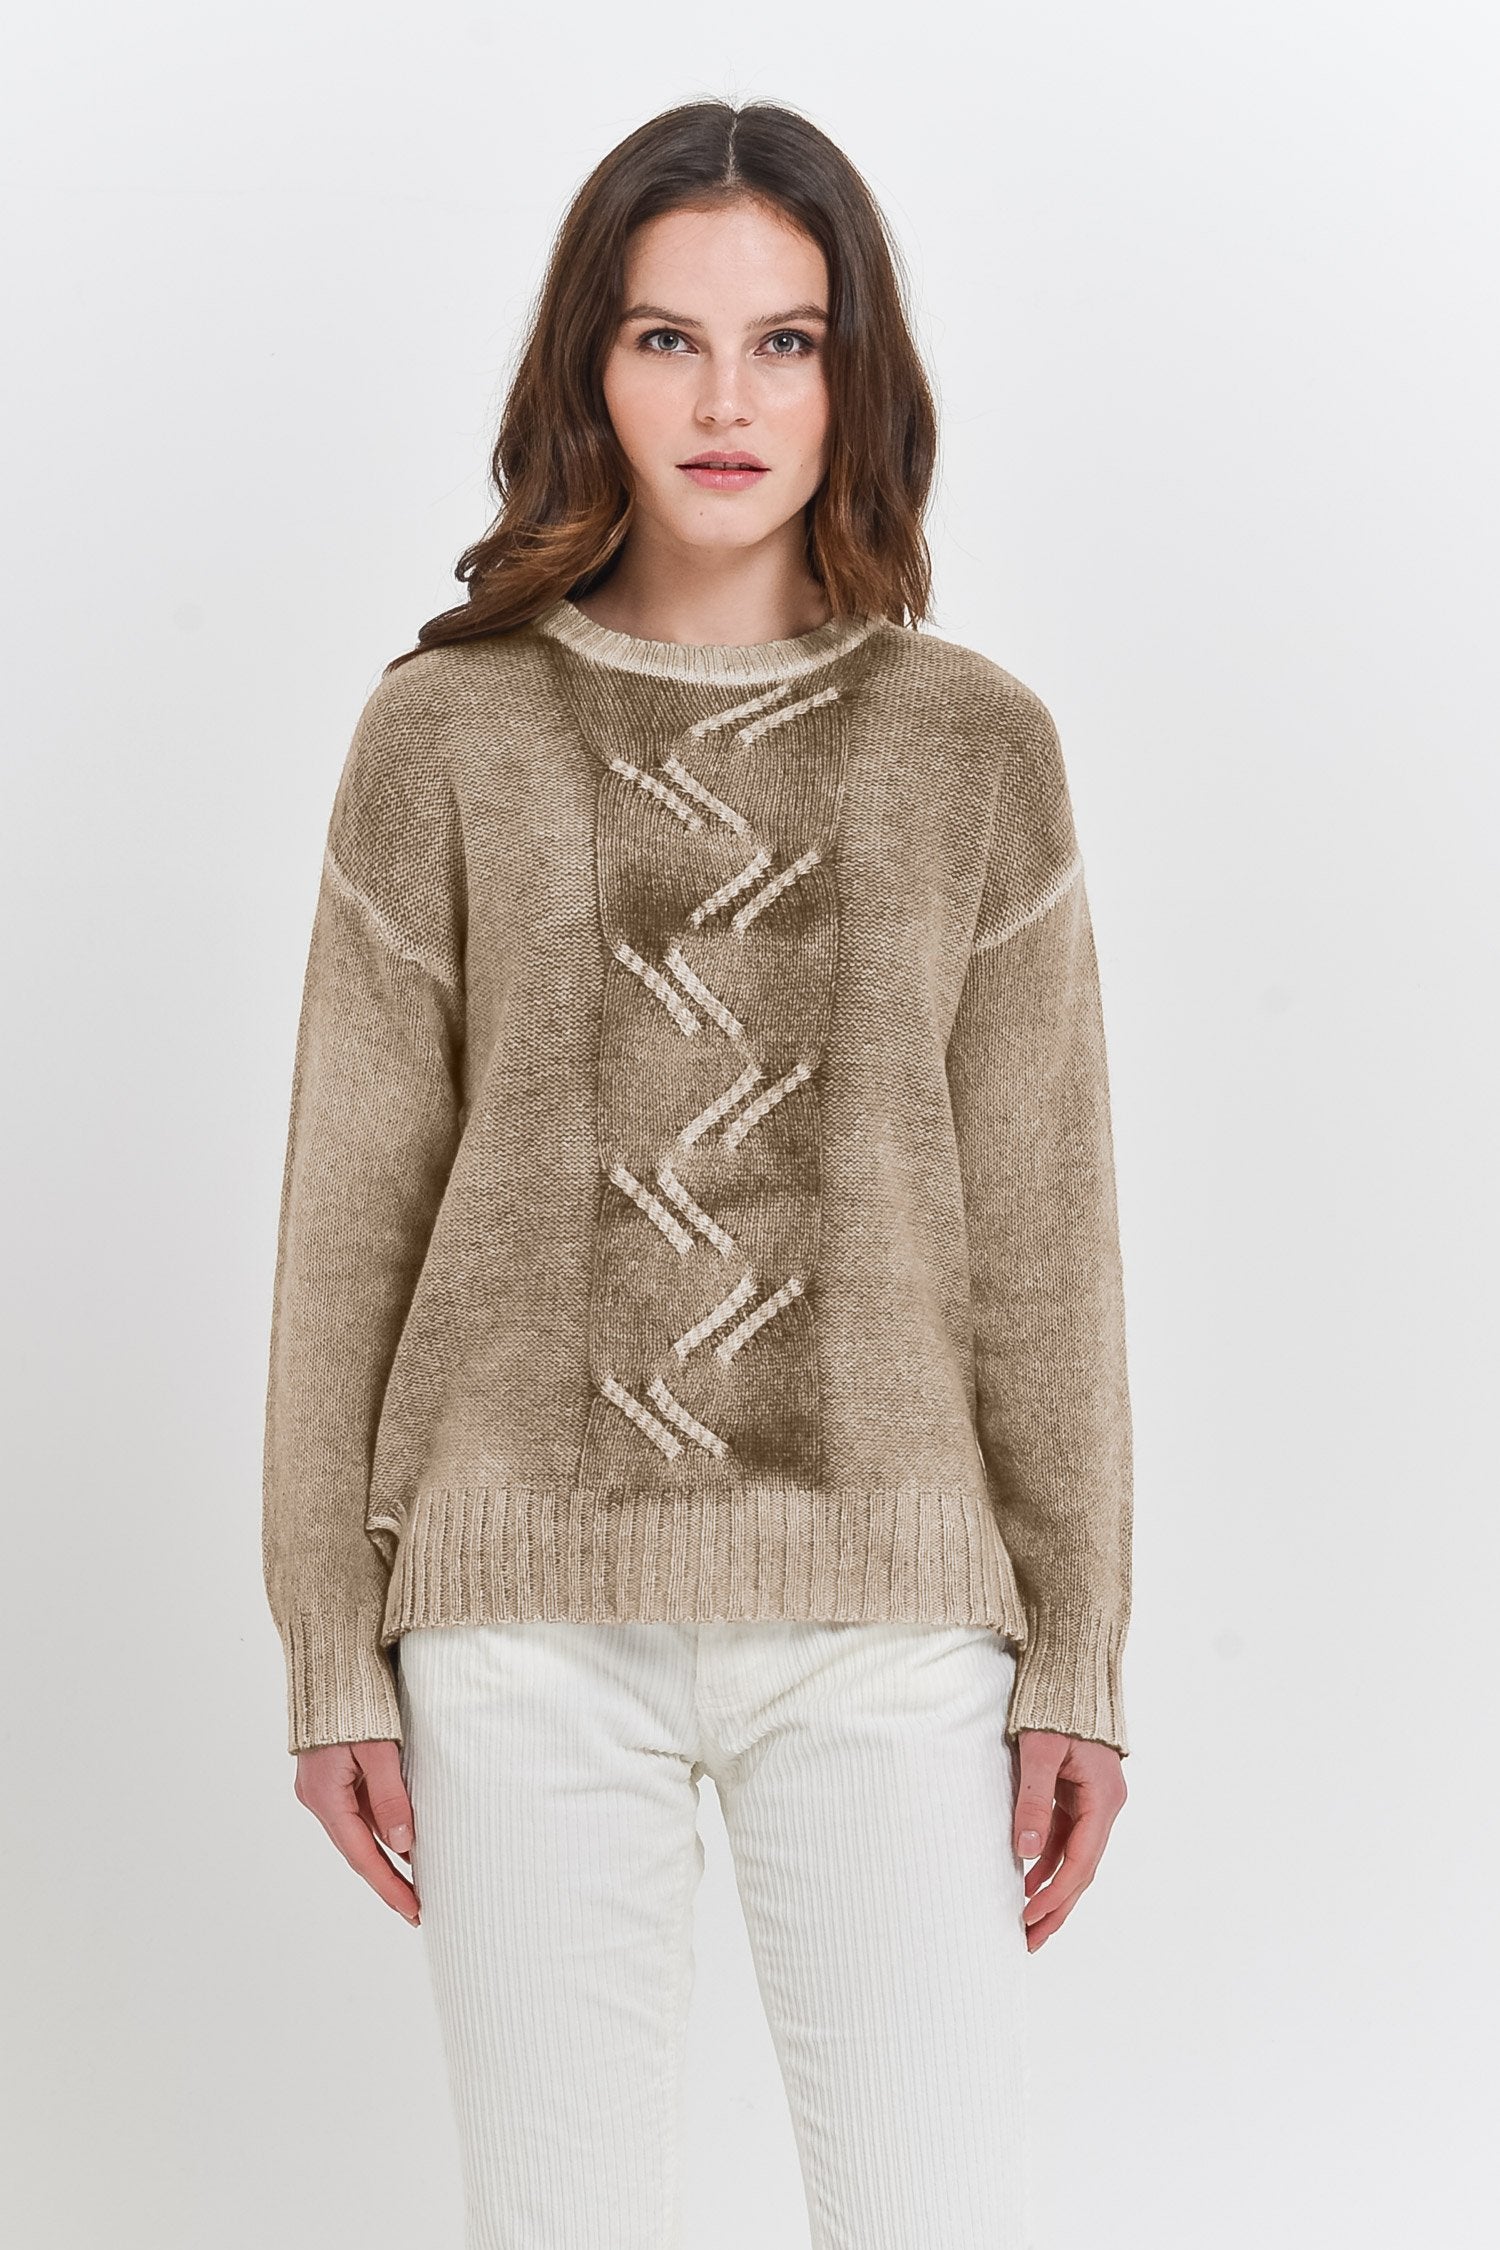 Copse Wood Spray Painted - Comfy Cable Sweater - Sweaters